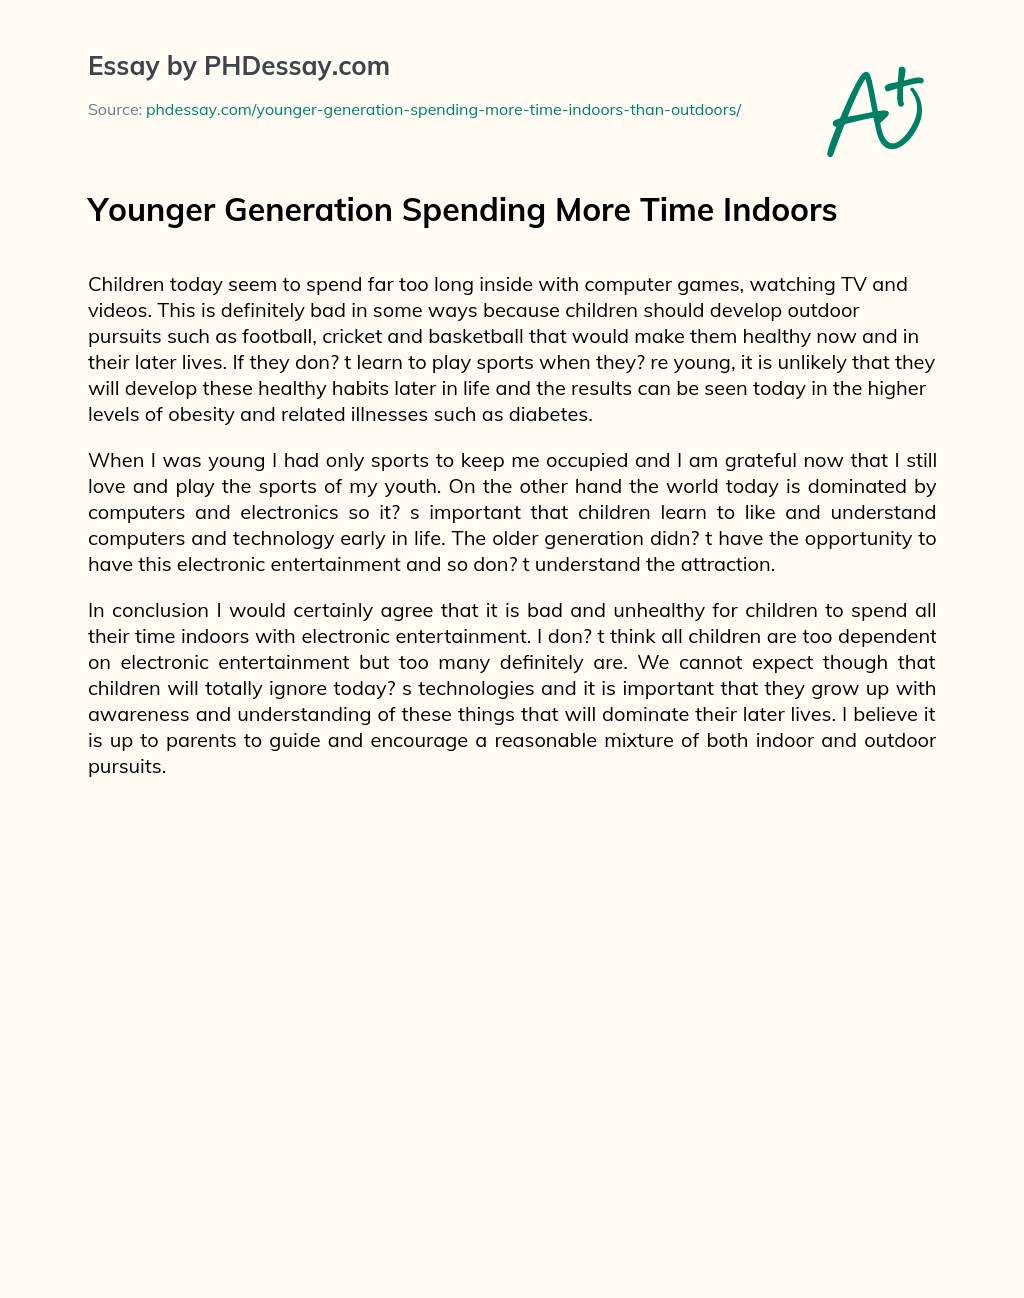 Younger Generation Spending More Time Indoors essay